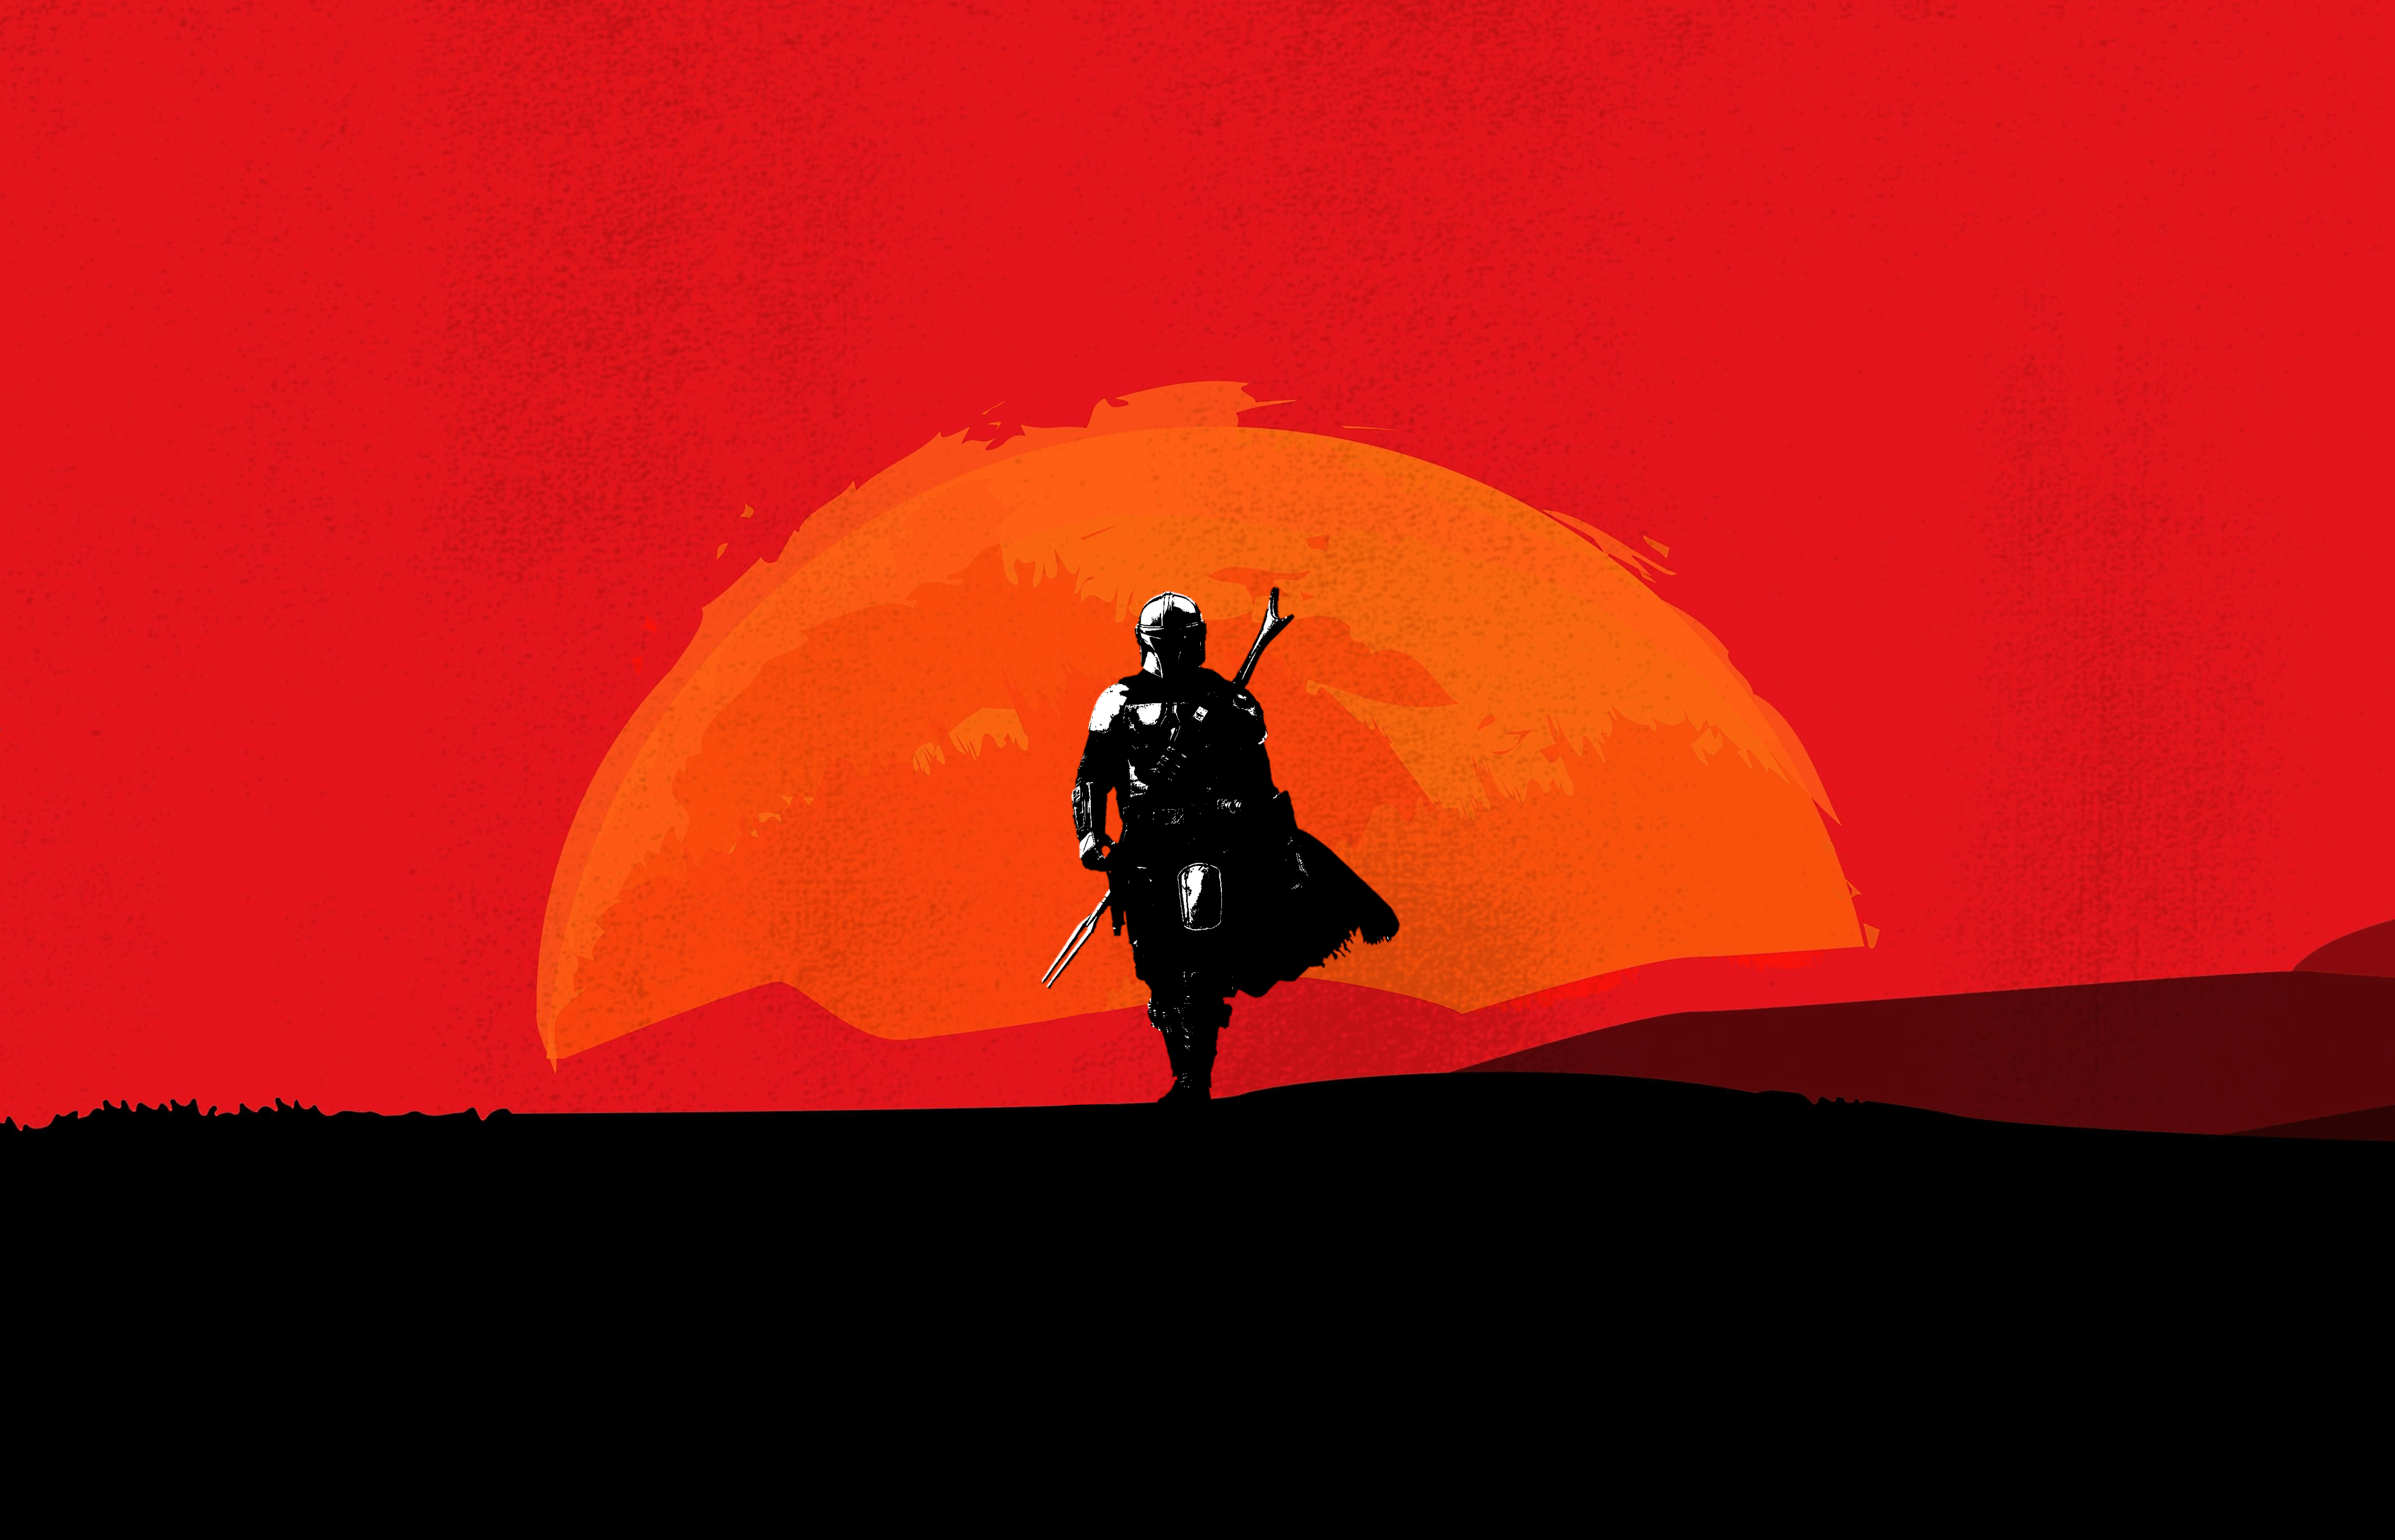 I tried to create a Mandalorian x Red Dead Redemption 2 wallpaper (the resolution is kinda wack, but works well for a Full HD monitor)